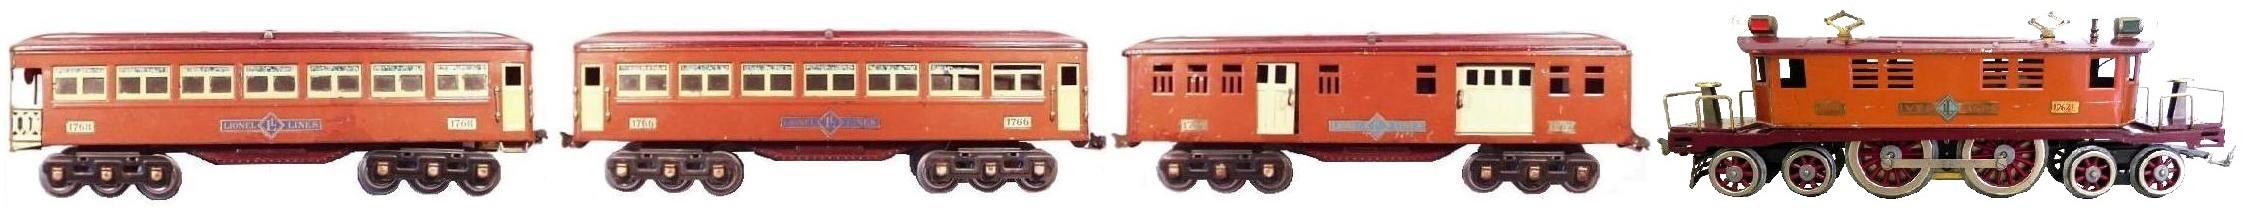 Lionel Ives Transition Standard gauge set with extremely rare #1764E locomotive and #1766 Parlor car, #1768 Observation car and #1767 Mail Baggage car